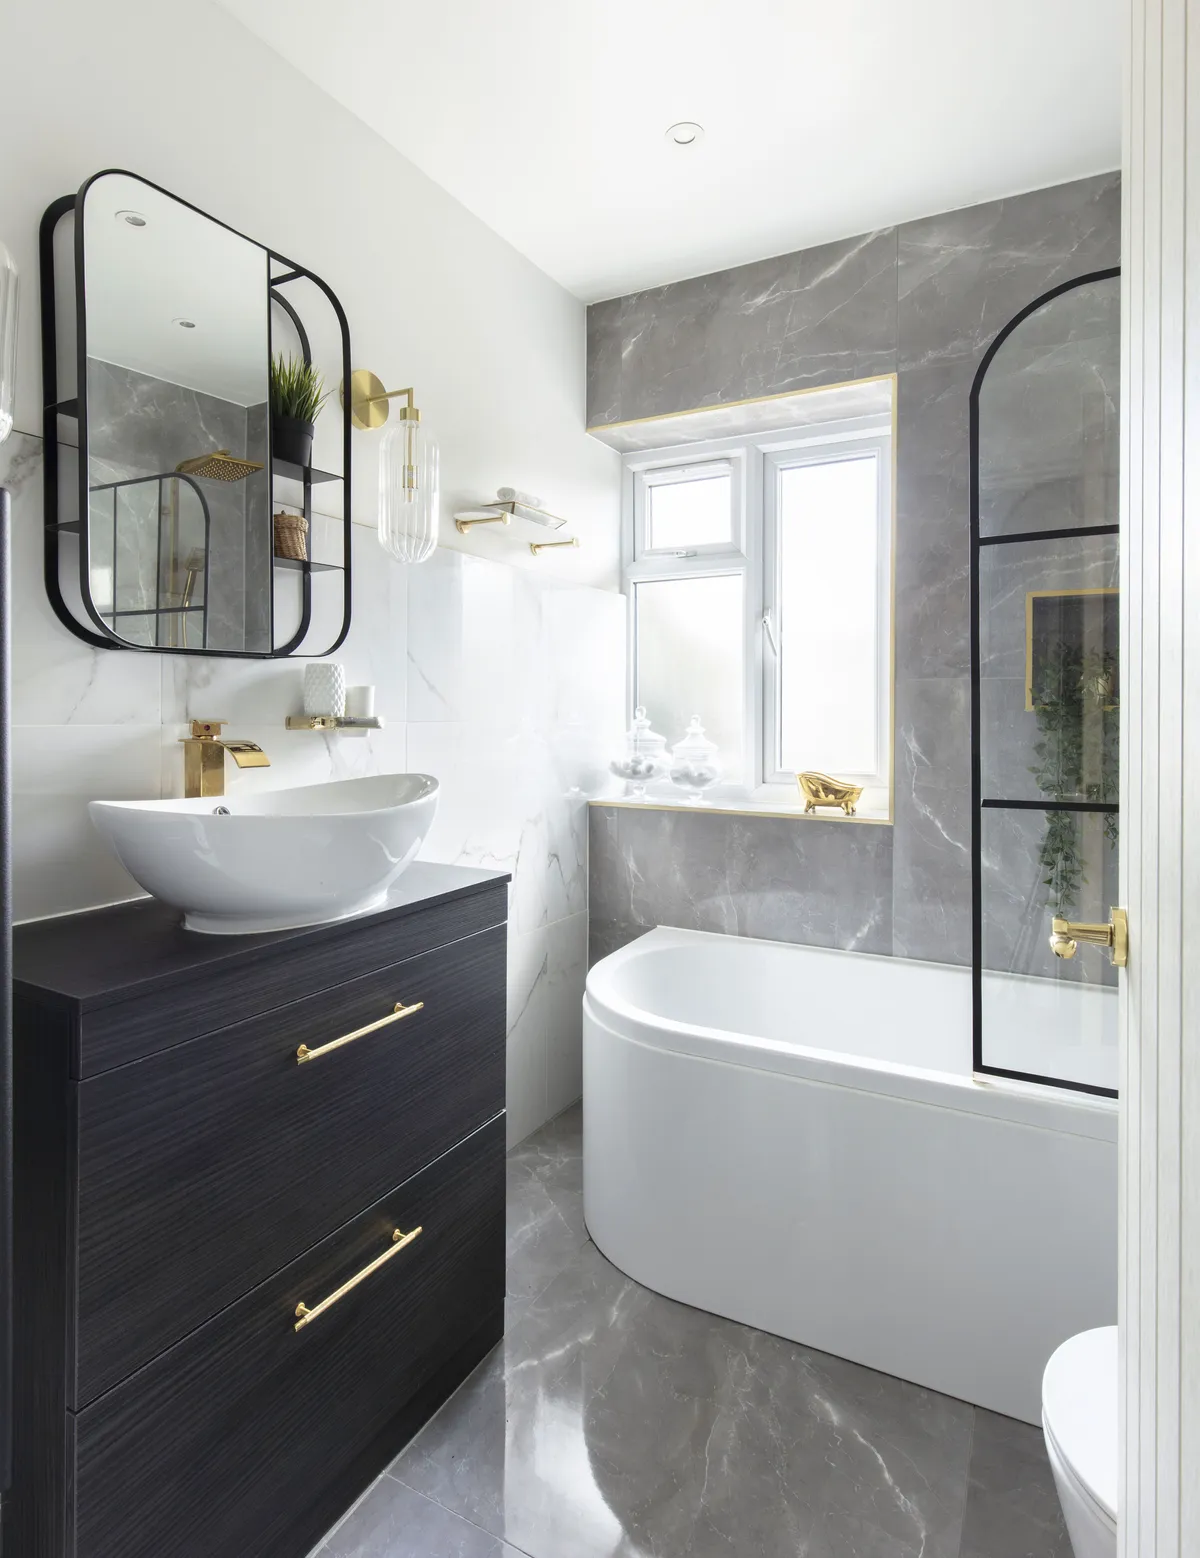 Making the most of the space, Alimah selected a white and grey palette for an airy feel, and chose a streamlined suite. ‘It was all very disjointed with too much stuff in a small space,’ she says. ‘I designed our new-look bathroom to have a luxury finish’